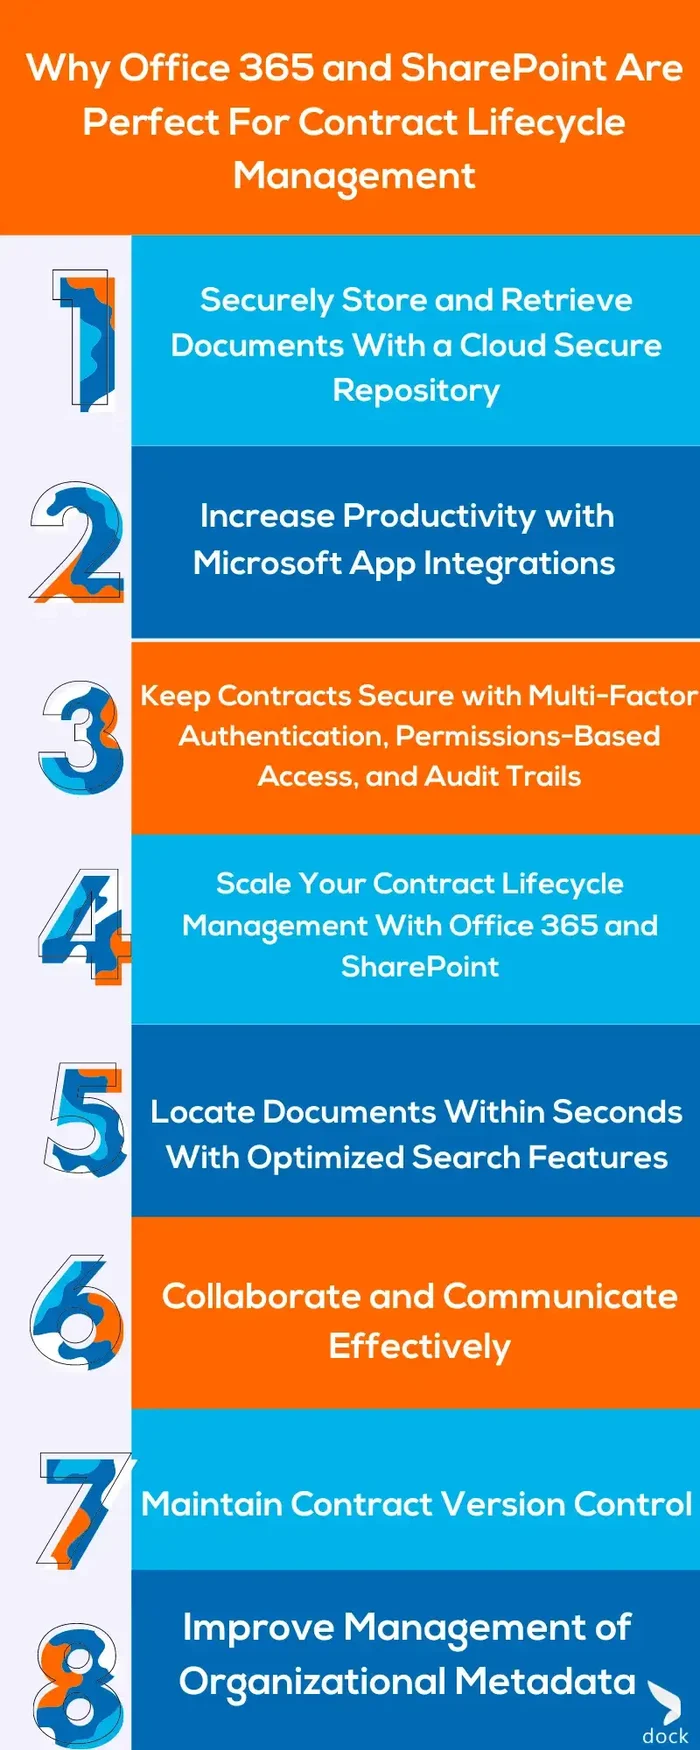 Why Office 365 and SharePoint Are Perfect For Contract Lifecycle Management.